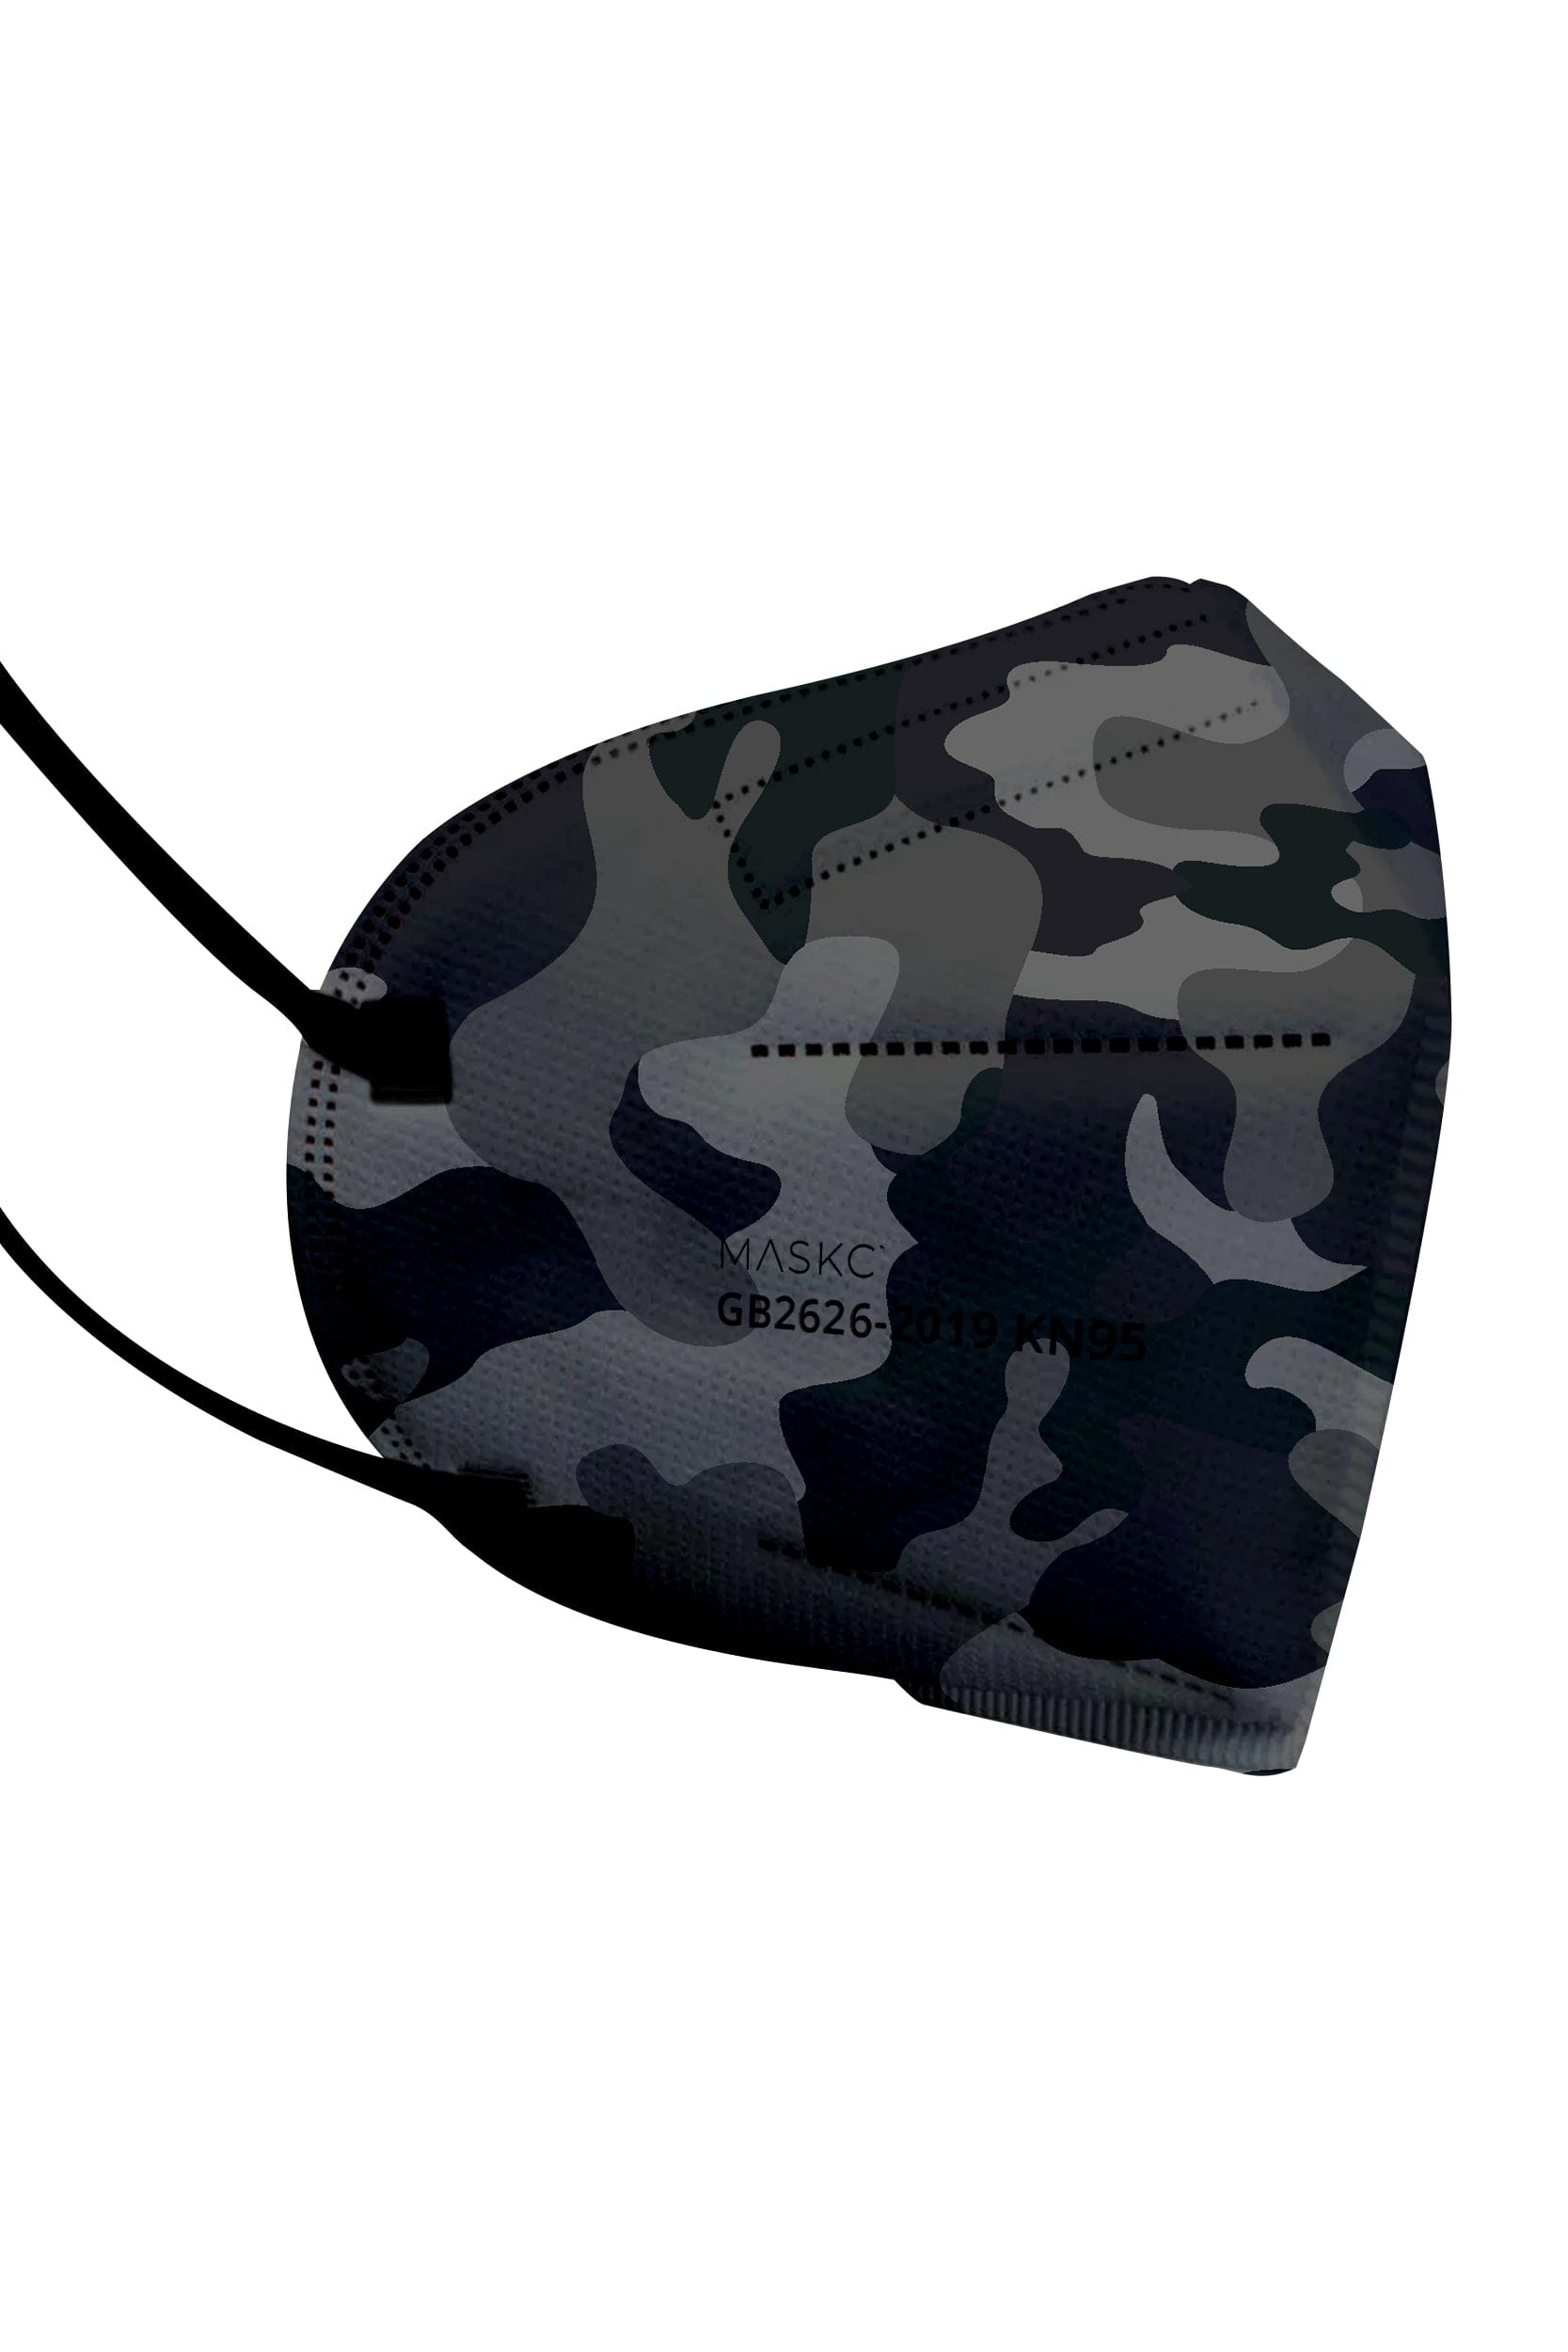 Stylish Black Camo Printed KN95 face mask, with soft black ear loops and high quality fabric.